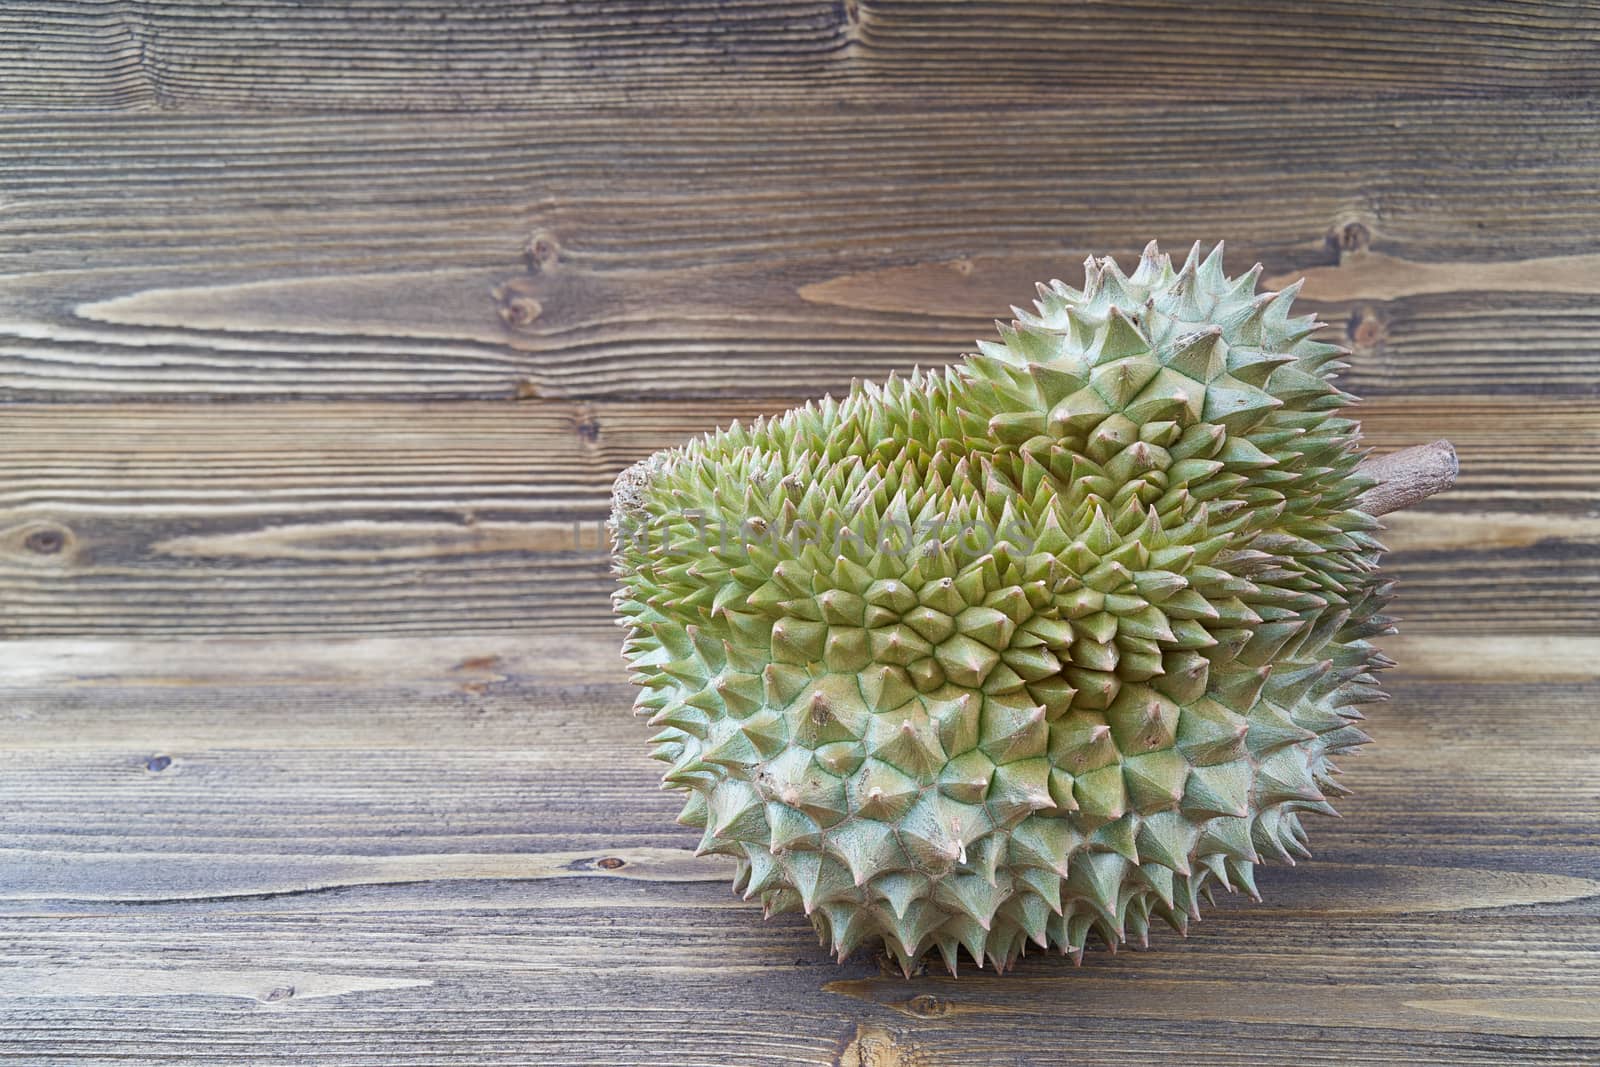 Durio zibethinus or Durian ripe with spikes on brown jane wooden texture background with copy space. Mon thong is King of fruits from Thailand.